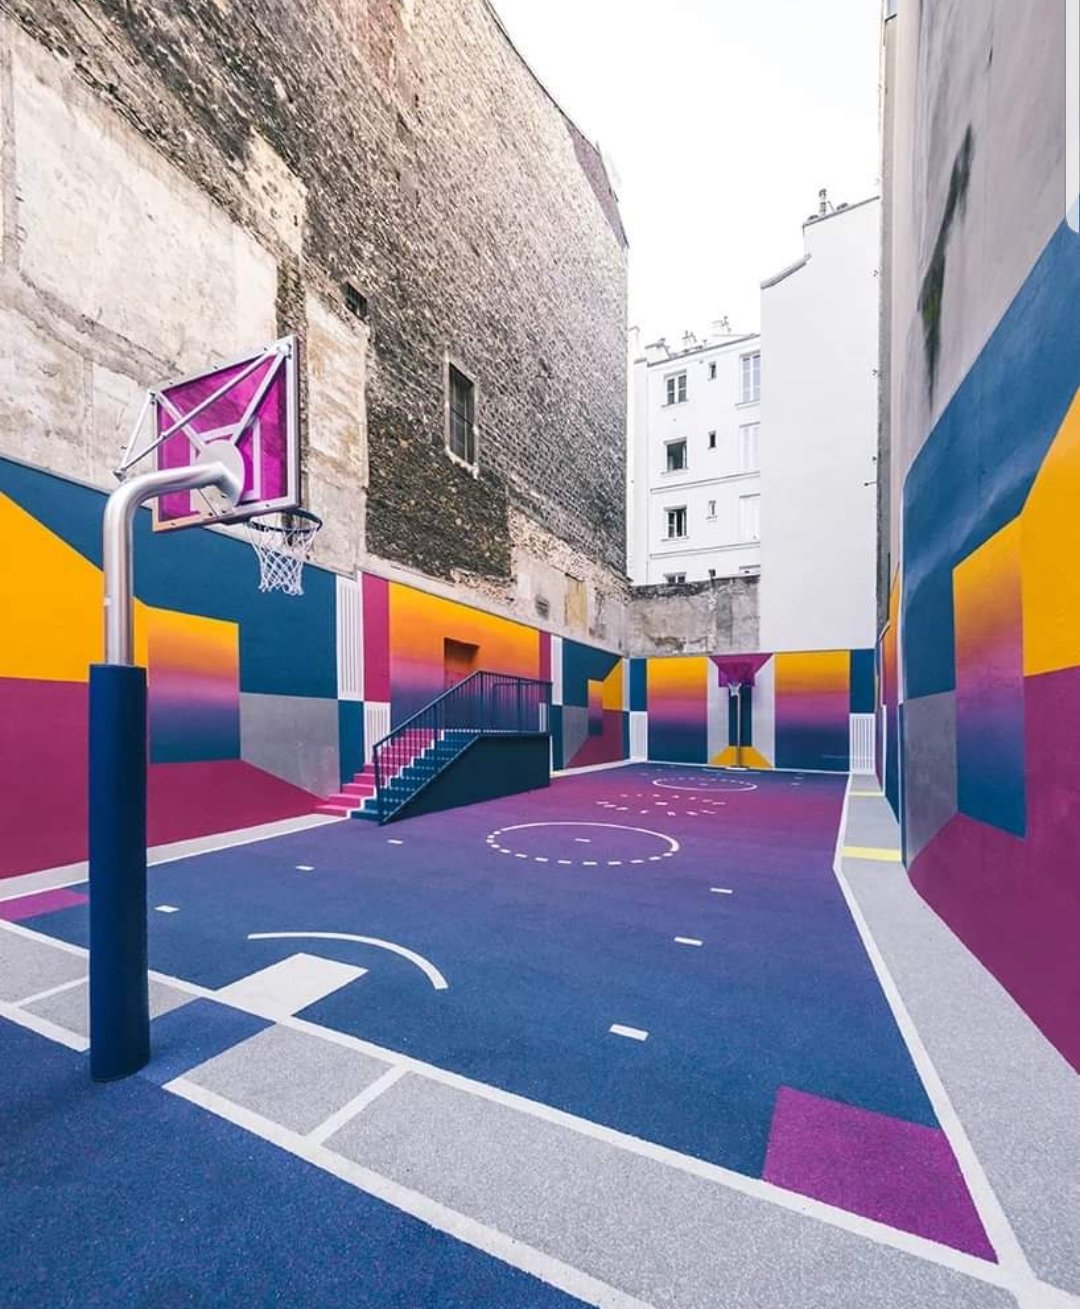 PlaytopNZ on Twitter: "Check out Playtop Nike Grind safer surfacing at a basketball at Rue Duperre in Paris, between two buildings! Colour mixed to your specifications https://t.co/hH1sX6oxsM https://t.co/raun1UMbH2 0800752986 andy ...